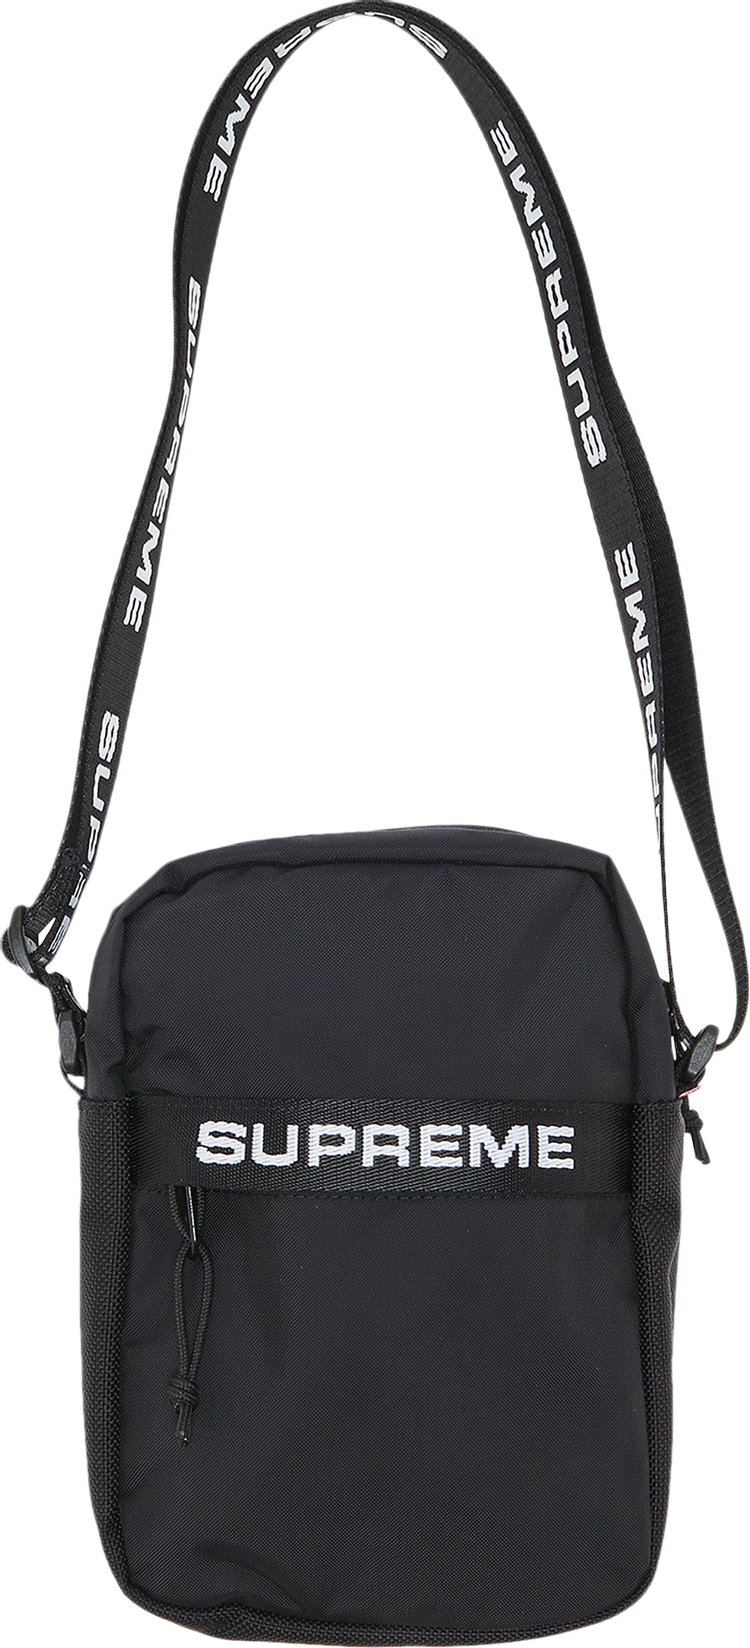 Buy Supreme Shoulder Bags: New Releases & Iconic Styles